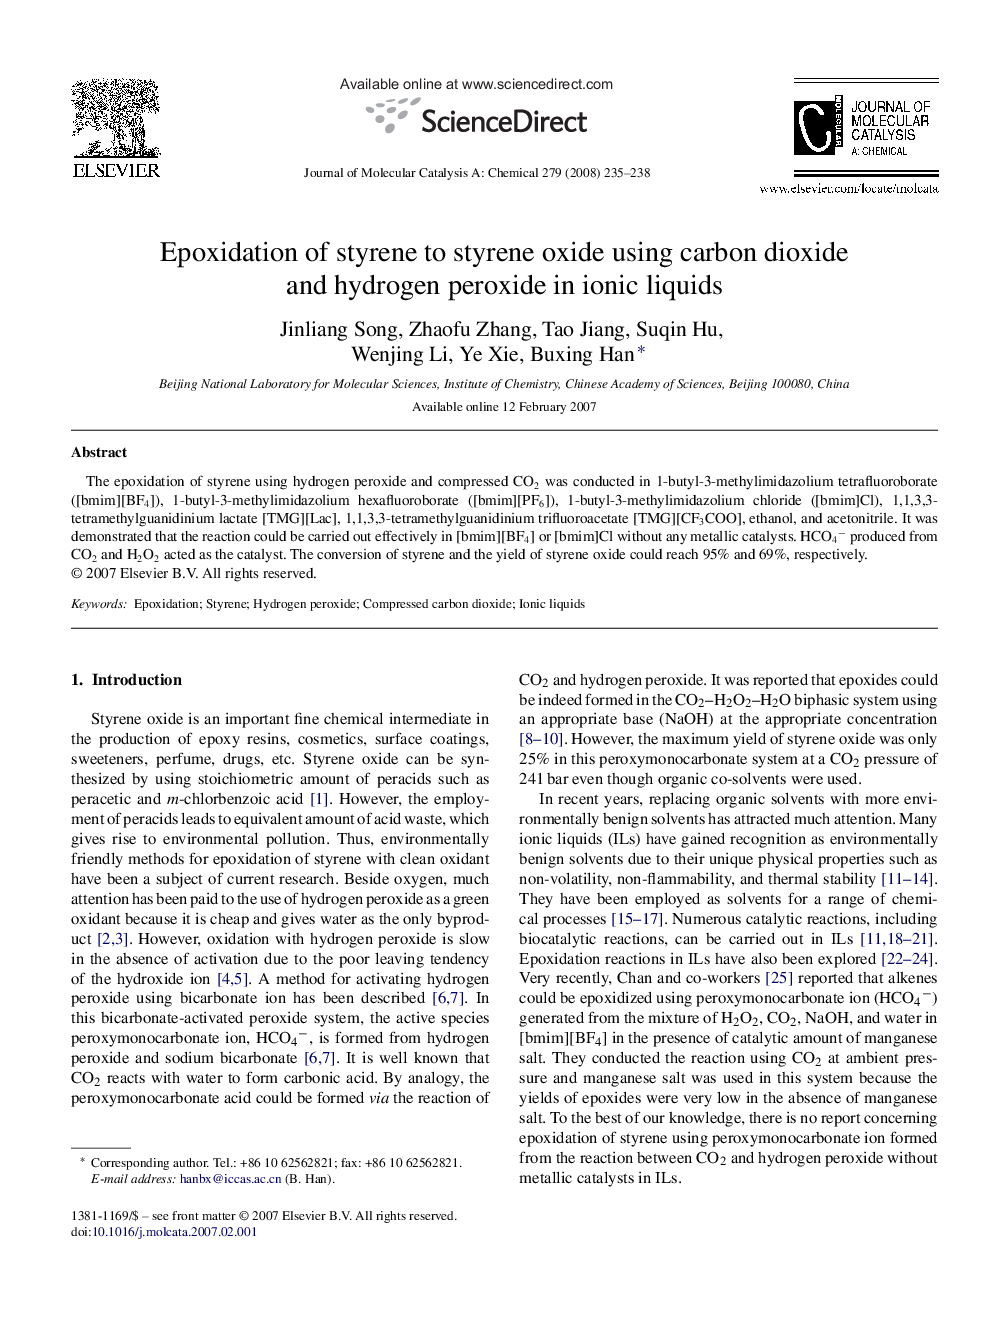 Epoxidation of styrene to styrene oxide using carbon dioxide and hydrogen peroxide in ionic liquids